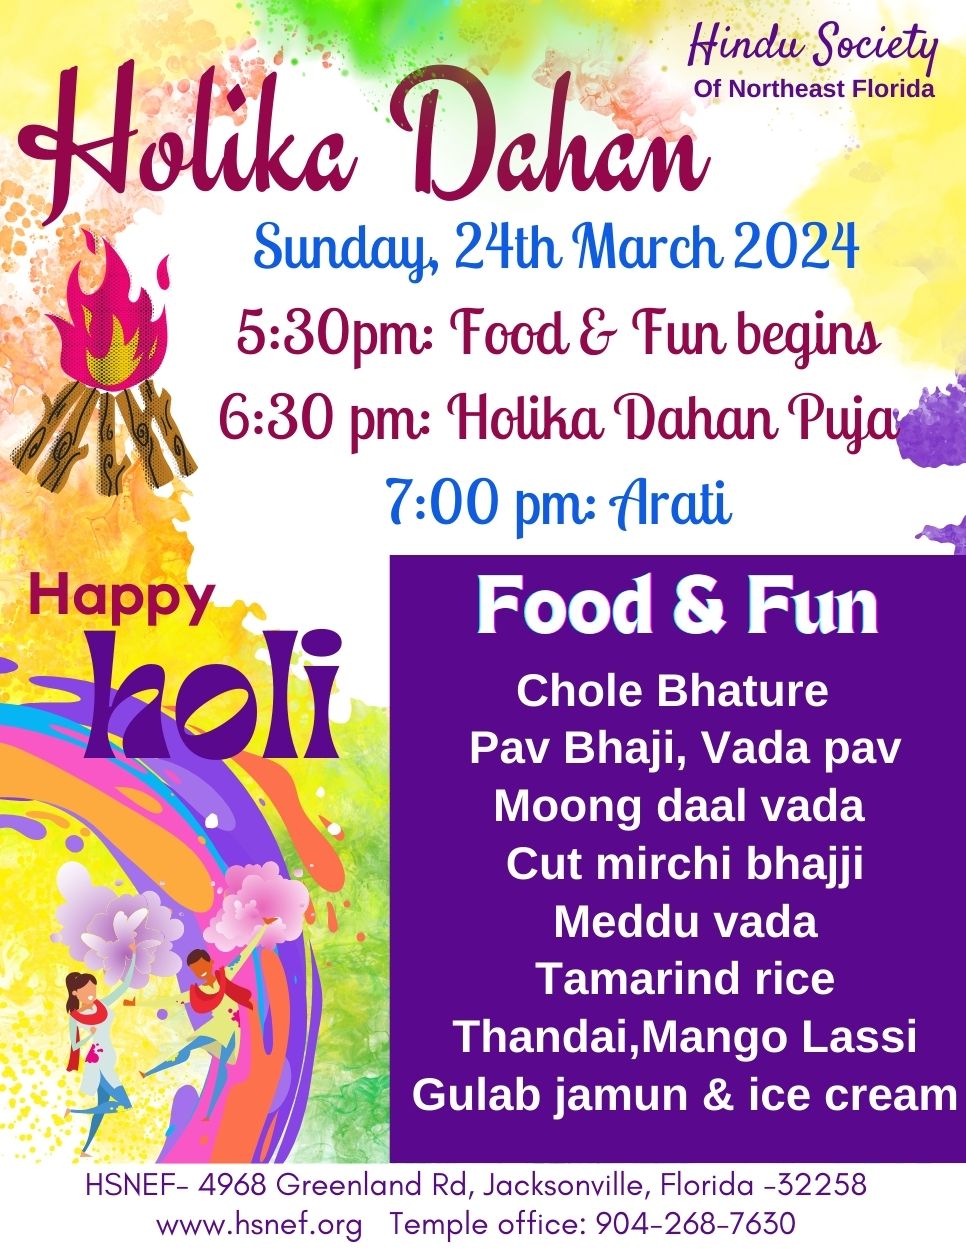 Holika Dahan to be celebrated at HSNEF on Sunday March 24th 2024 with Food and Fun to begin at 5:30 PM and Holika Dahan Puja to begin at 6:30 PM